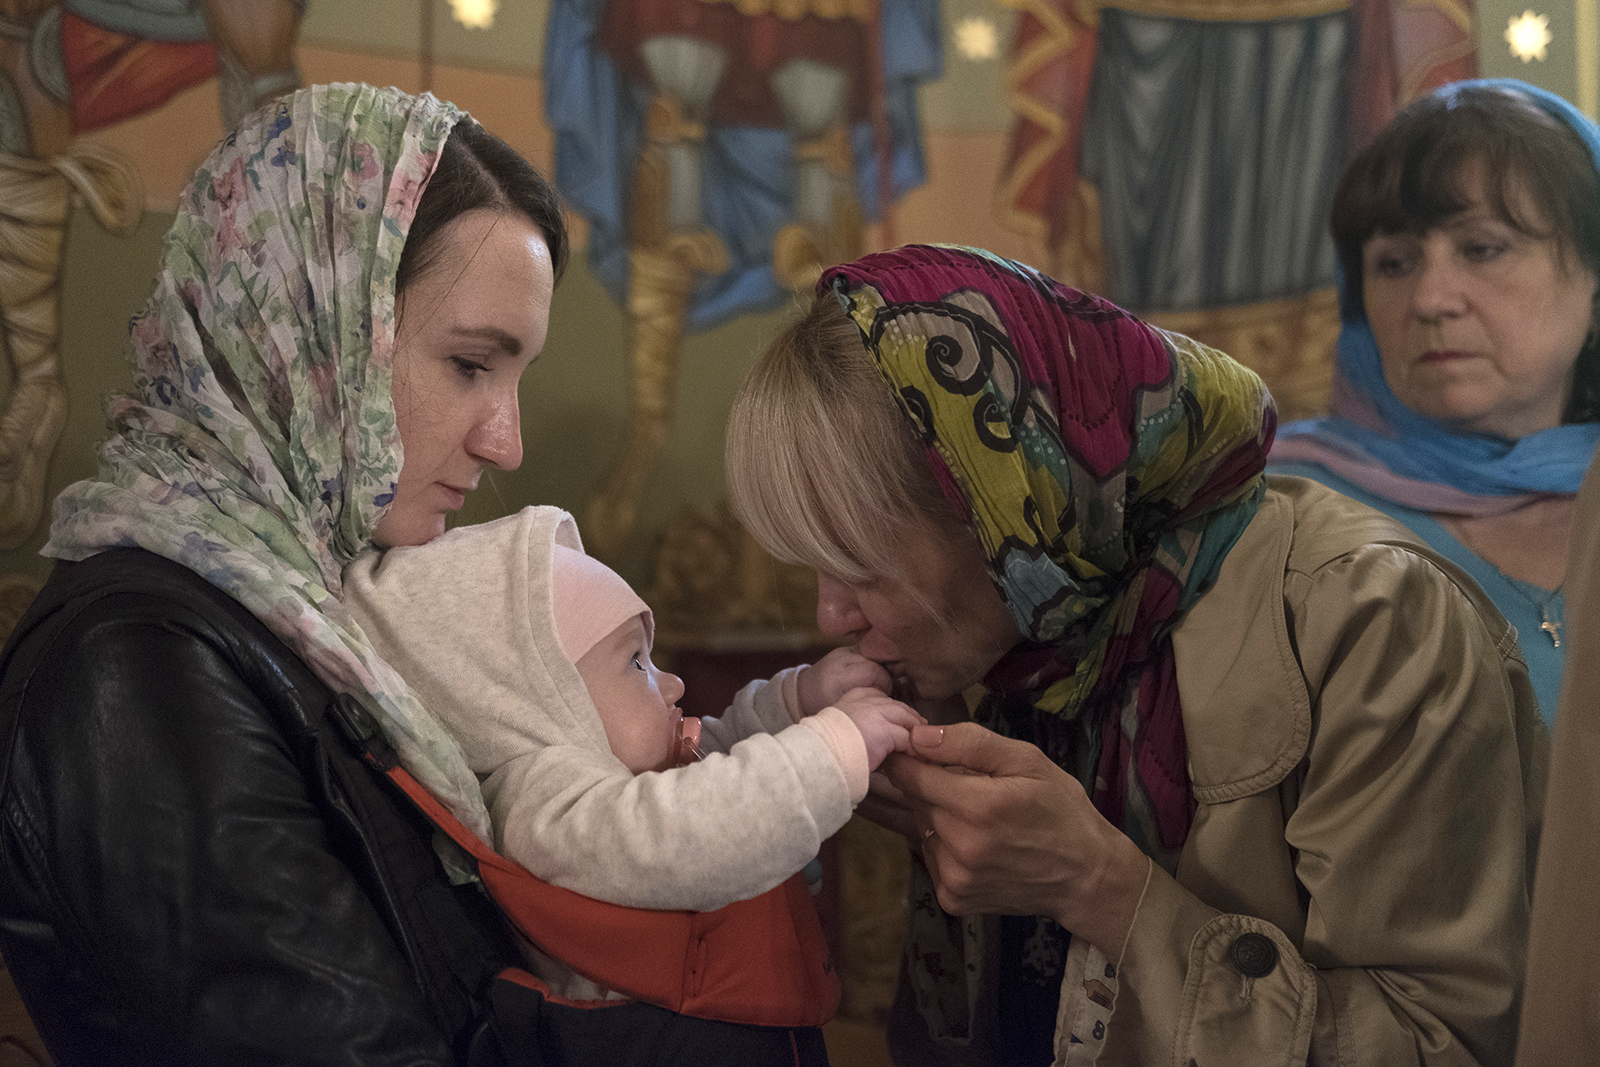 The majority of people that participated in the Easter Mass were Ukrainian mothers with children who fled the war into Romania and found a temporary home in Bucharest. RNS photo by Alexandra Radu